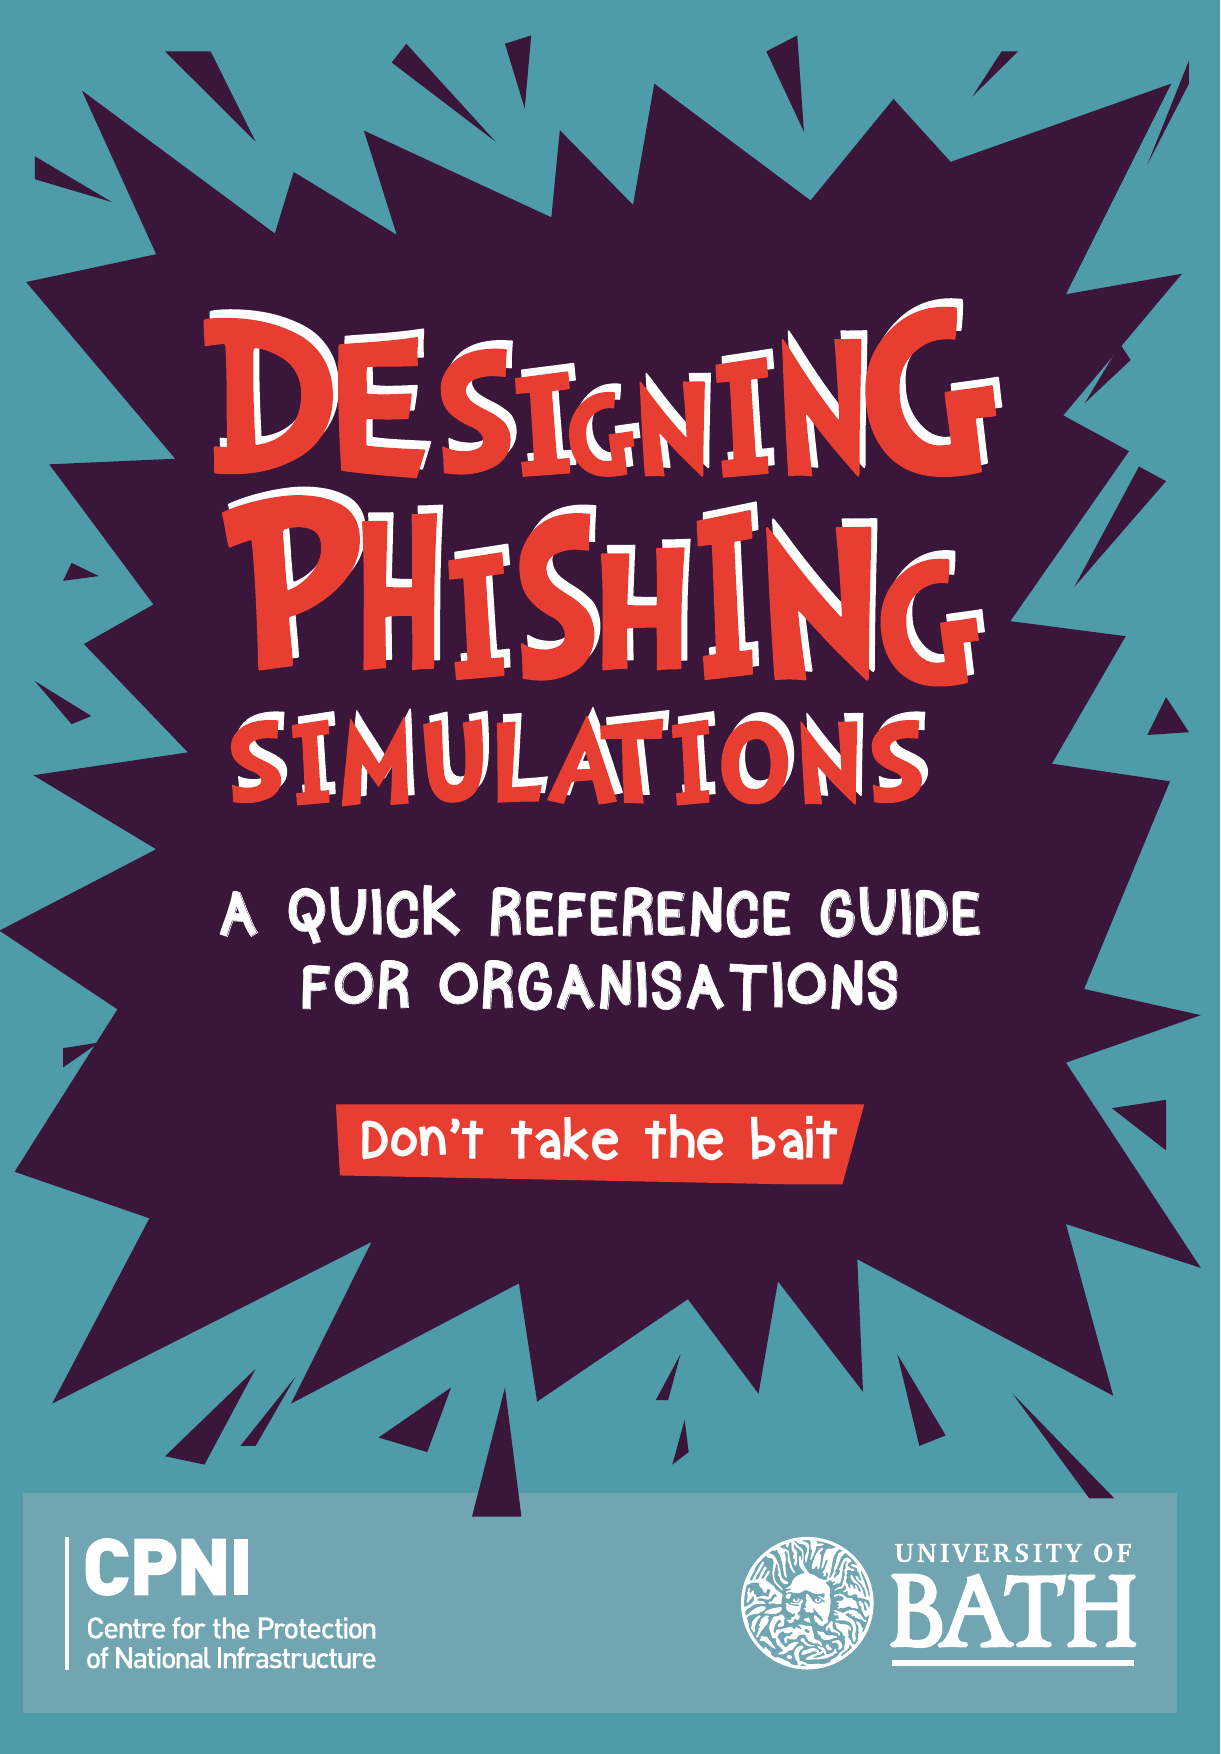 Page 1 of 9 - Phishing Simulations Guide